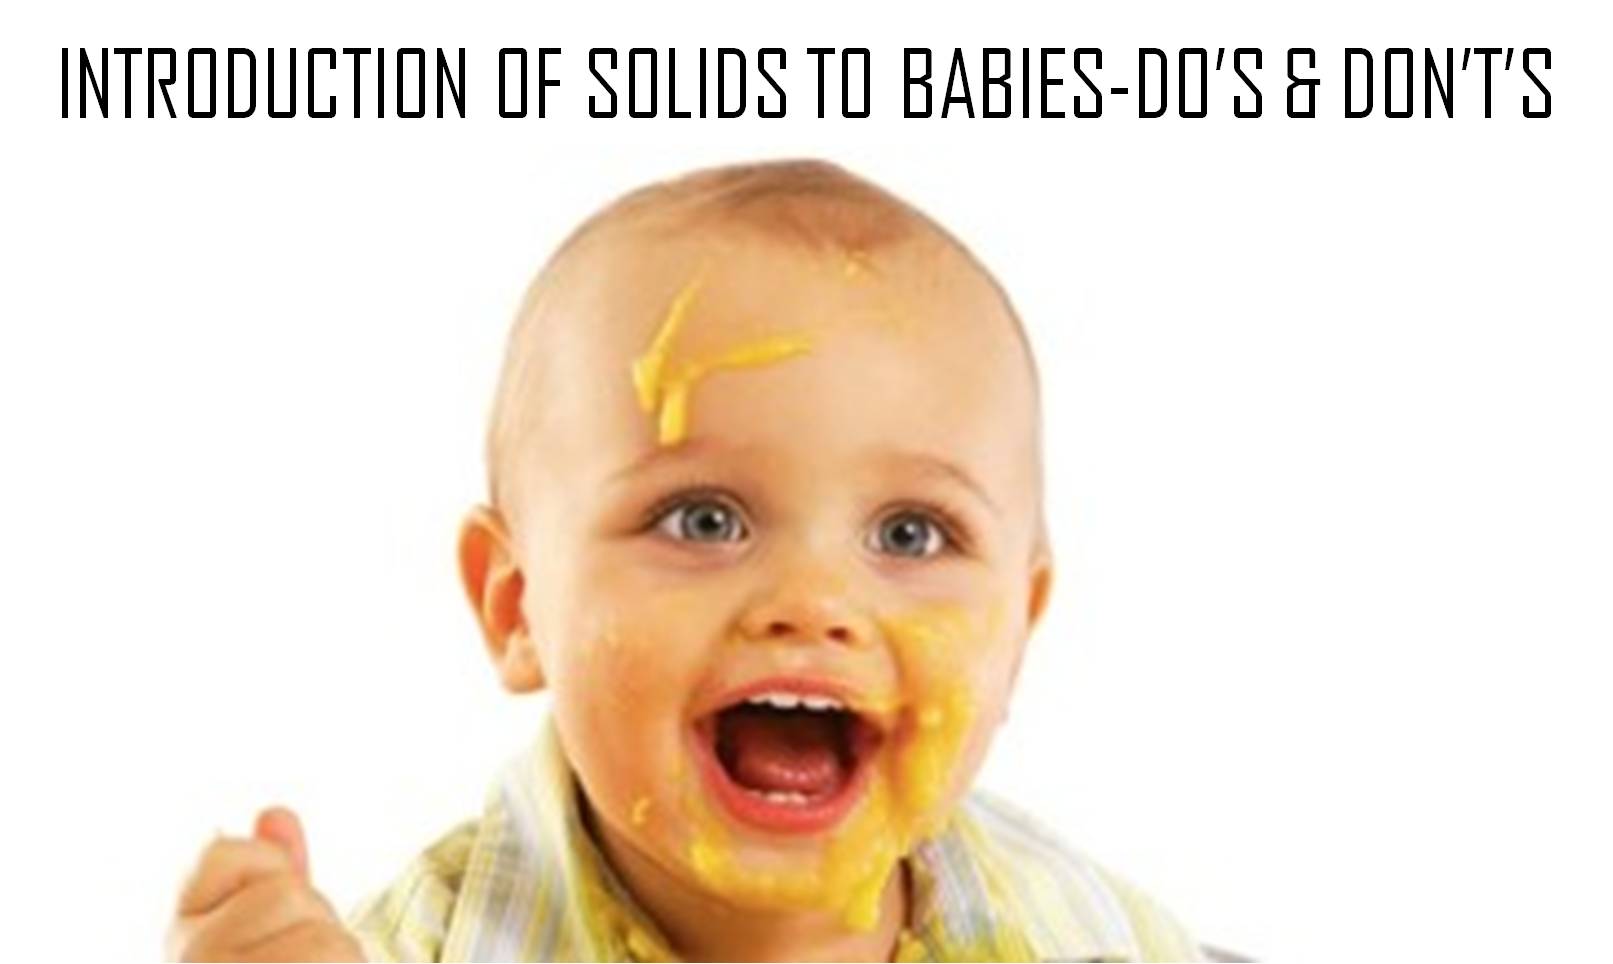 do's and don'ts of introducing solids